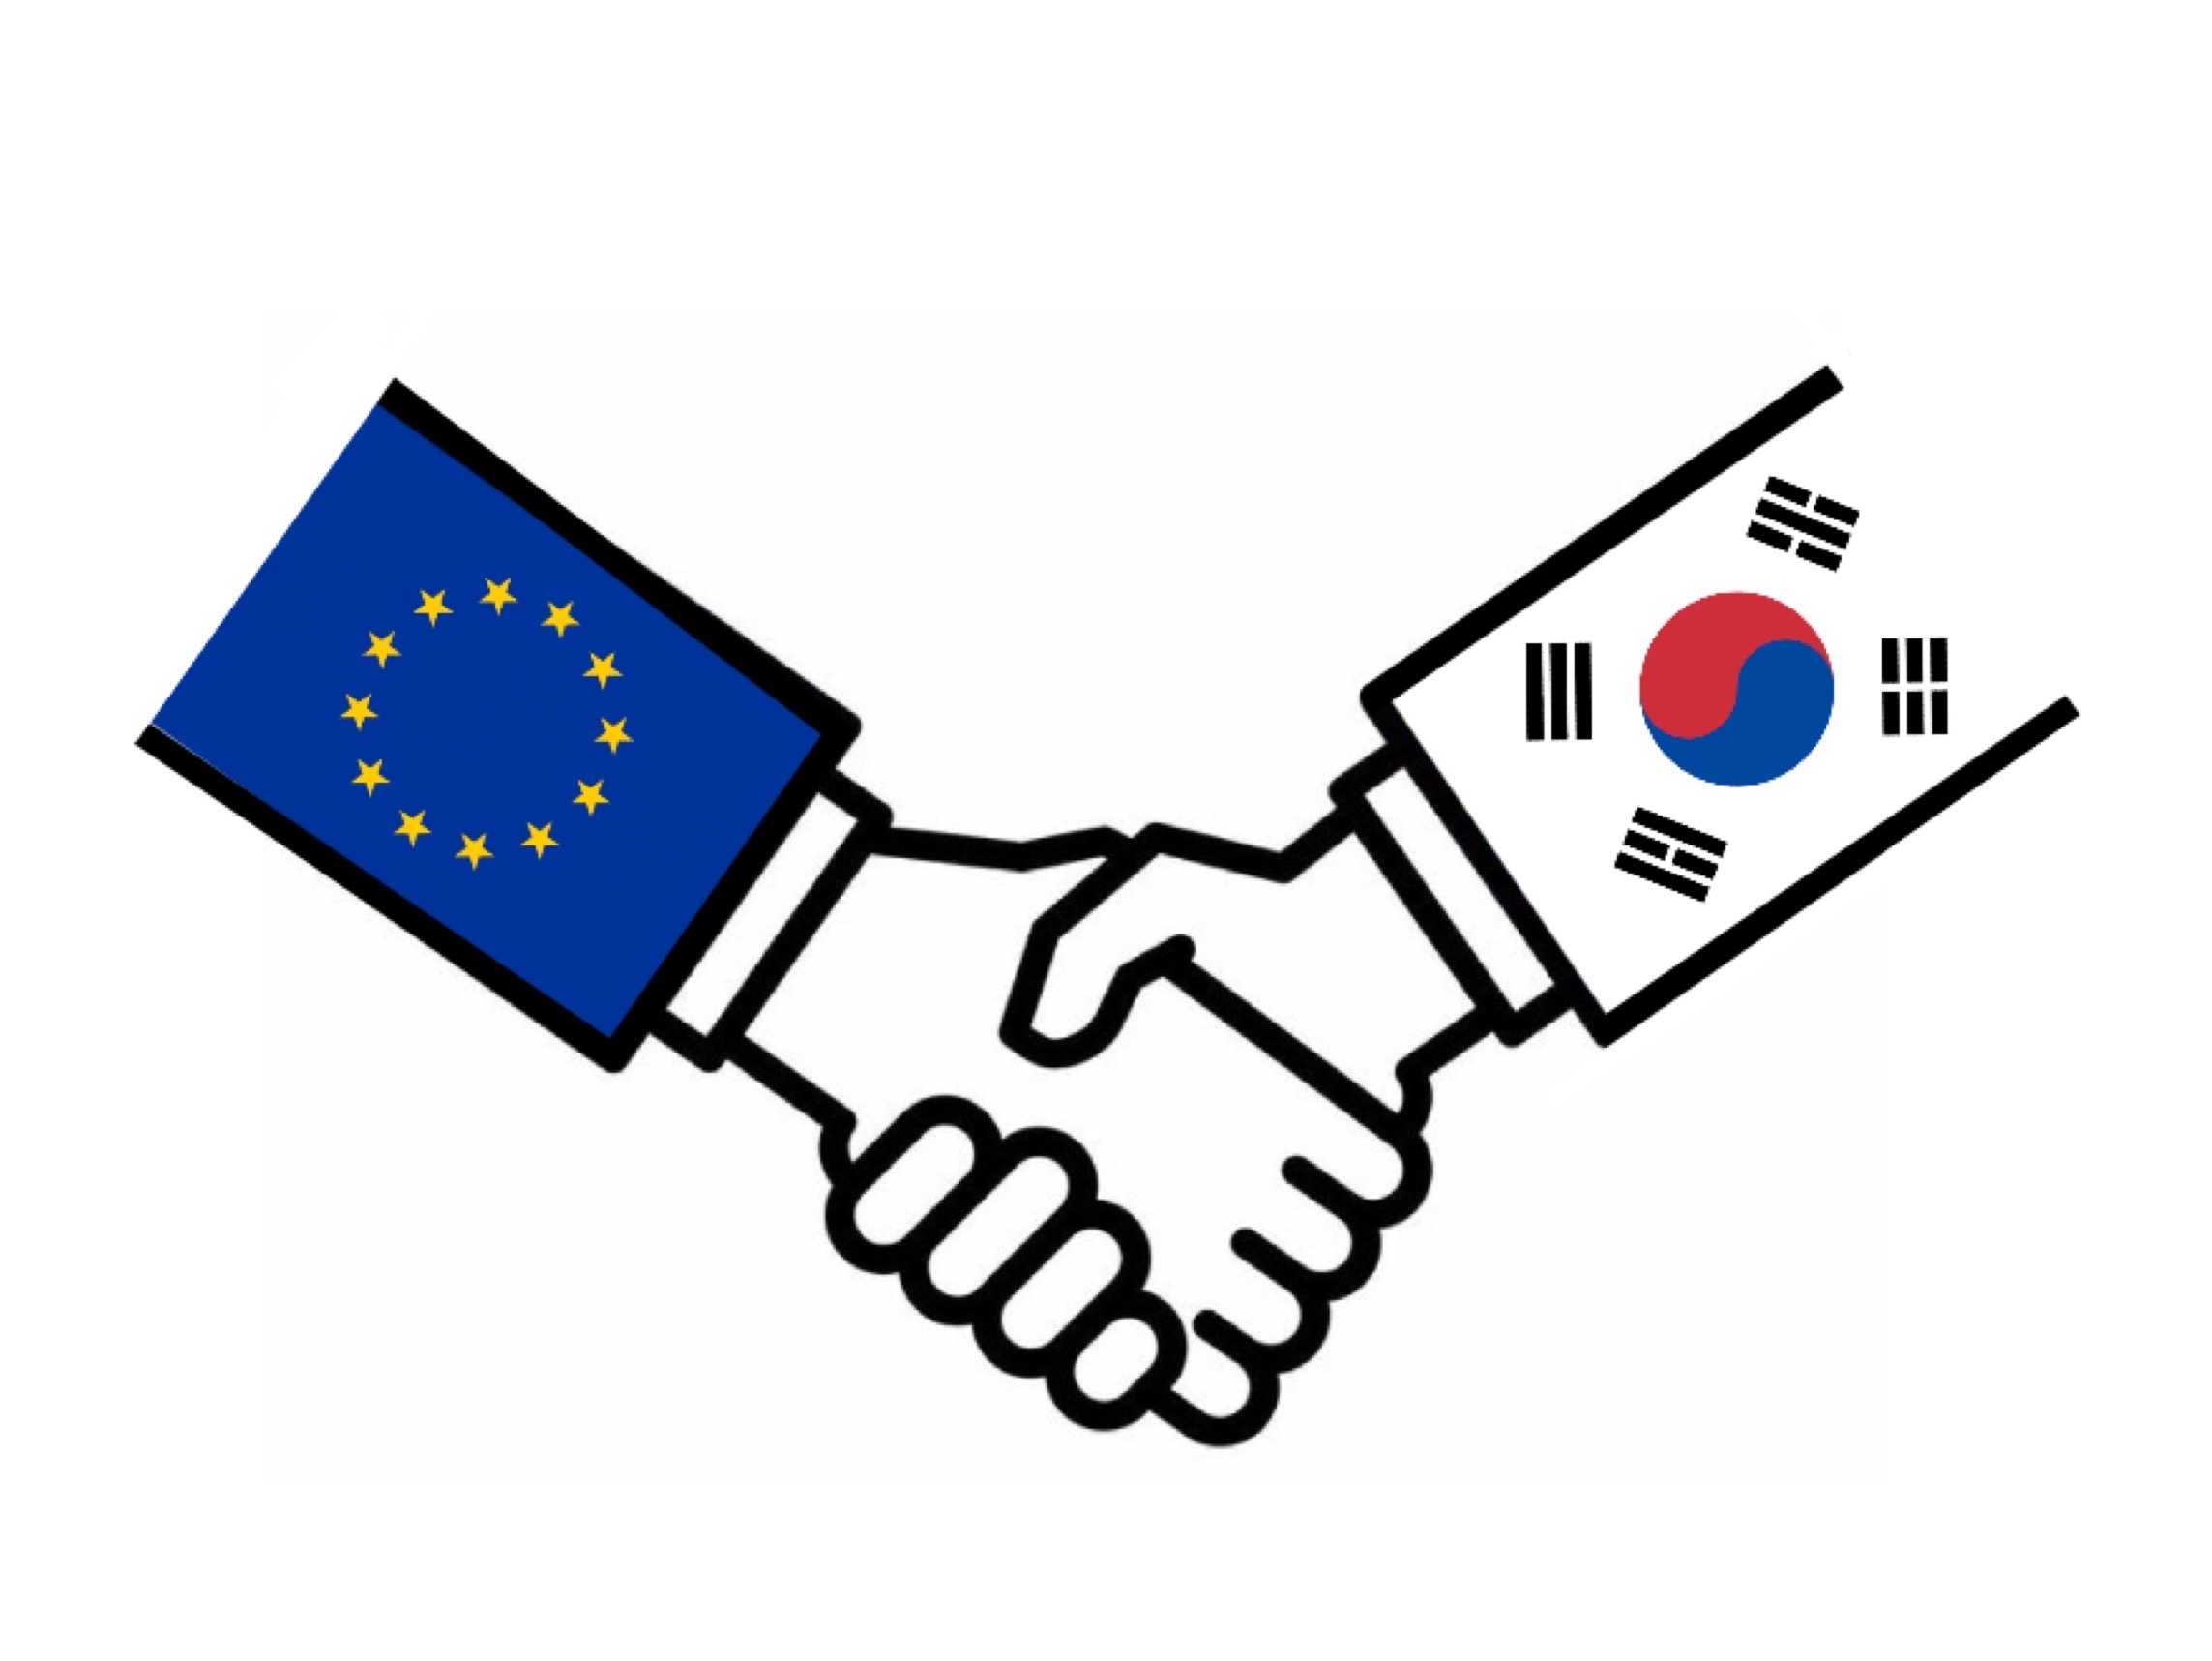 blog-is-germany-a-beneficiary-of-the-koreu-free-trade-agreement